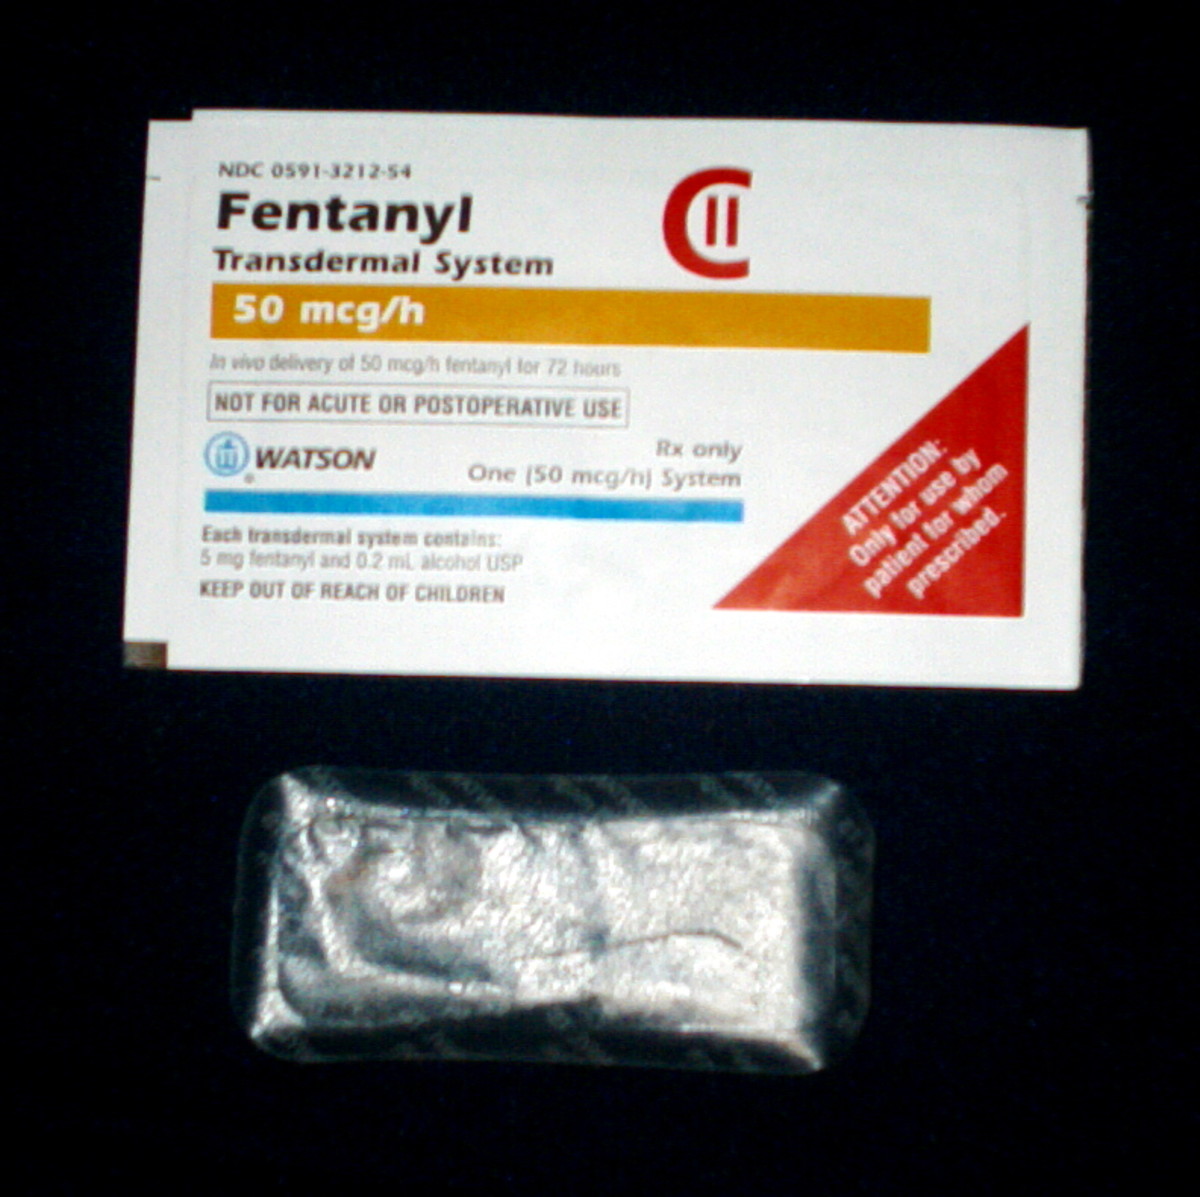 Fentanyl transdermal system patches contain large amounts of fentanyl that are meant to slowly be absorbed through the skin. Abusers of the drug open the patches to get the fentanyl, often with fatal consequences.